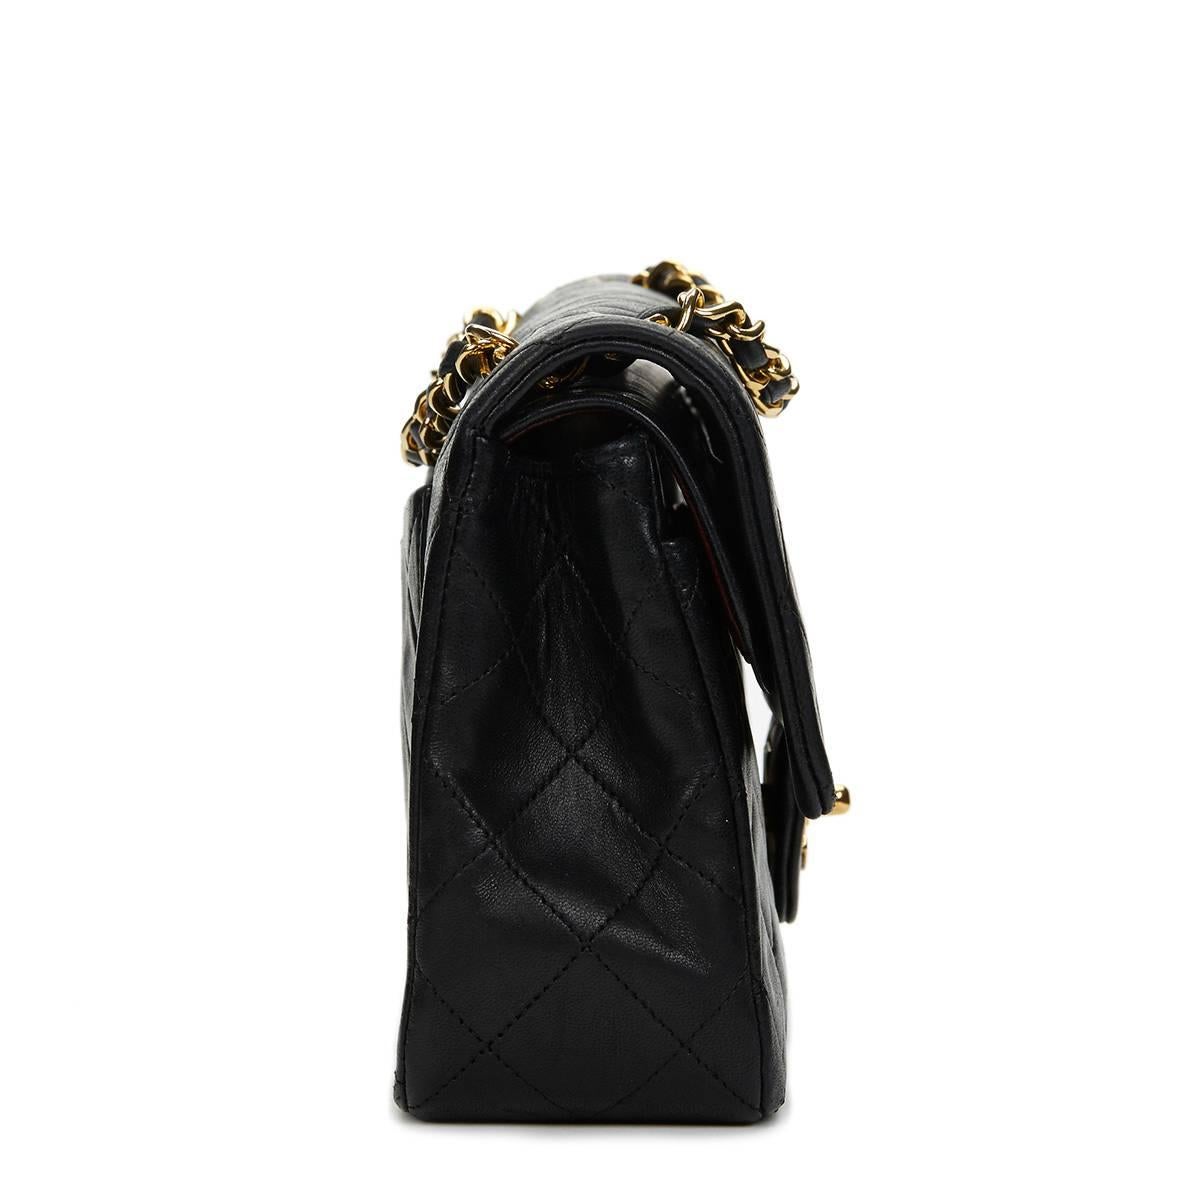 CHANEL
Black Quilted Lambskin Vintage Small Classic Double Flap Bag

This CHANEL Small Classic Double Flap Bag is in Excellent Pre-Owned Condition accompanied by Chanel Dust Bag. Circa 1991. Primarily made from Lambskin Leather complimented by Gold